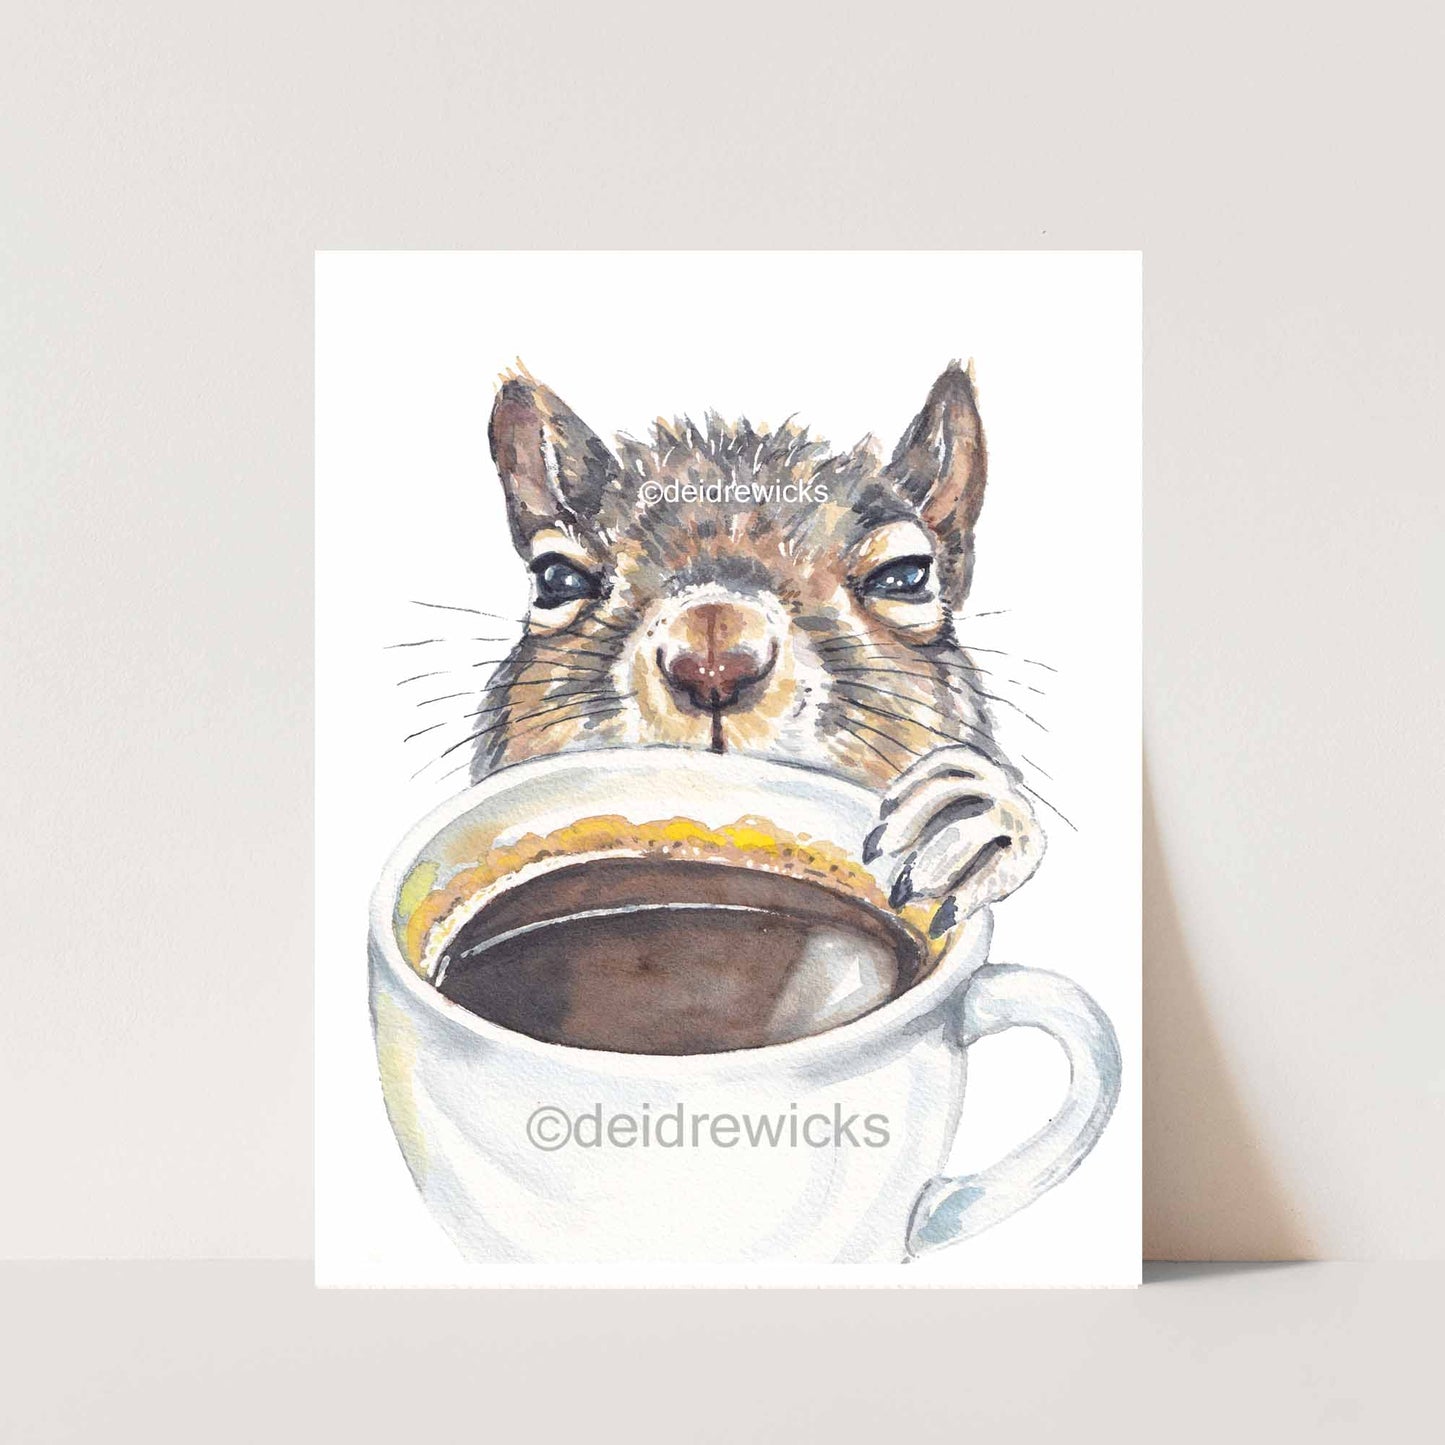 Watercolour painting of a bleary-eyed squirrel reaching for a cup of coffee. Original animal art by Deidre Wicks